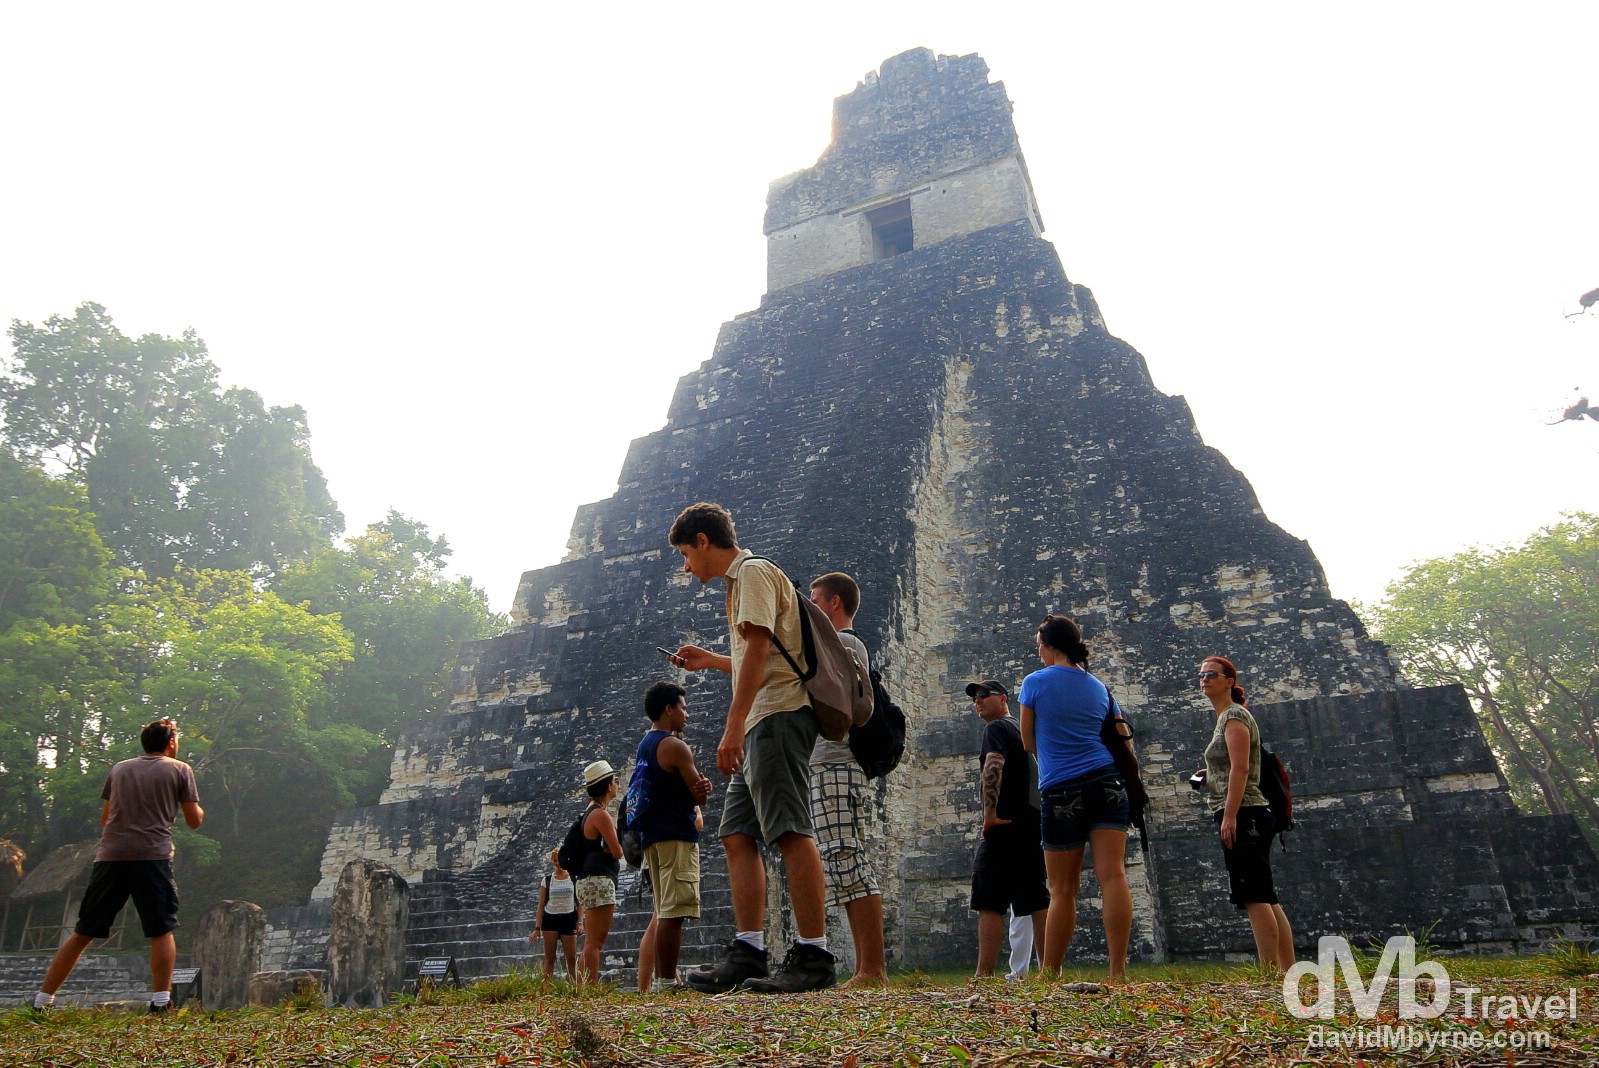 People in front of Temple 1, Temple of the Grand Jaguar in The Gran Plaza, Tikal Mayan ruins, Tikal National Park, northern Guatemala. May 17th 2013.